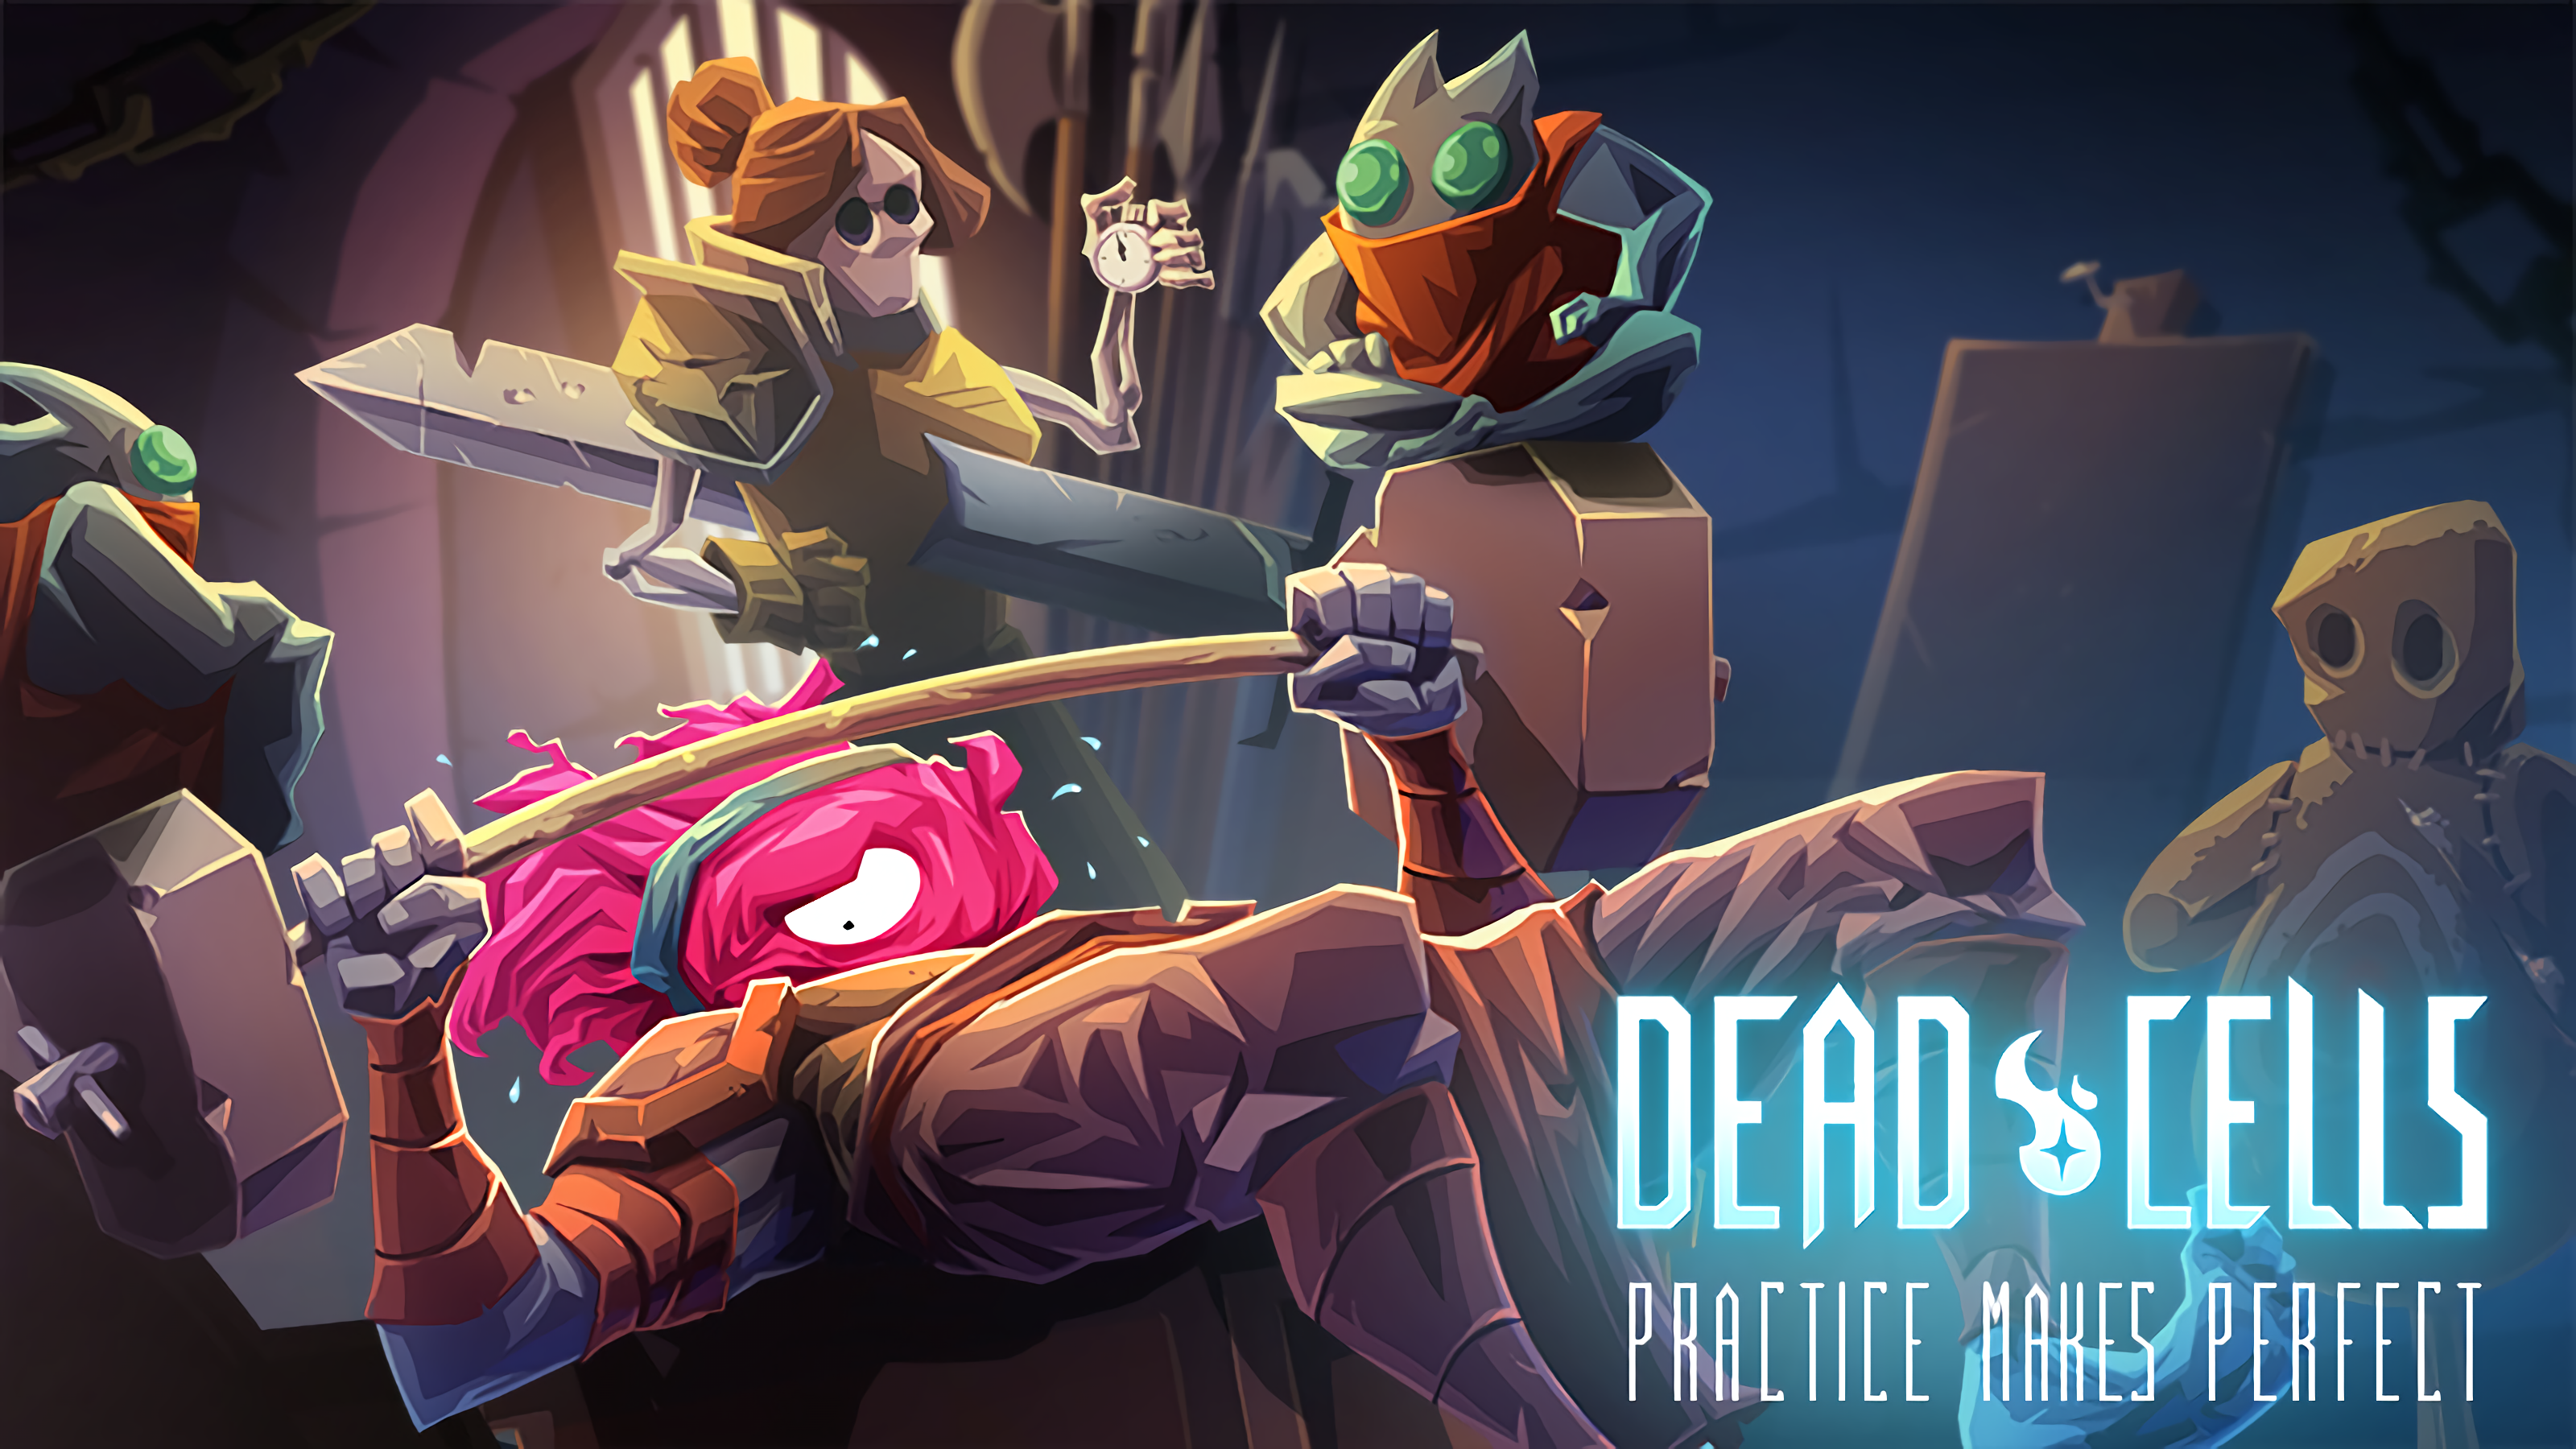 Dead Cells: The Bad Seed on Steam